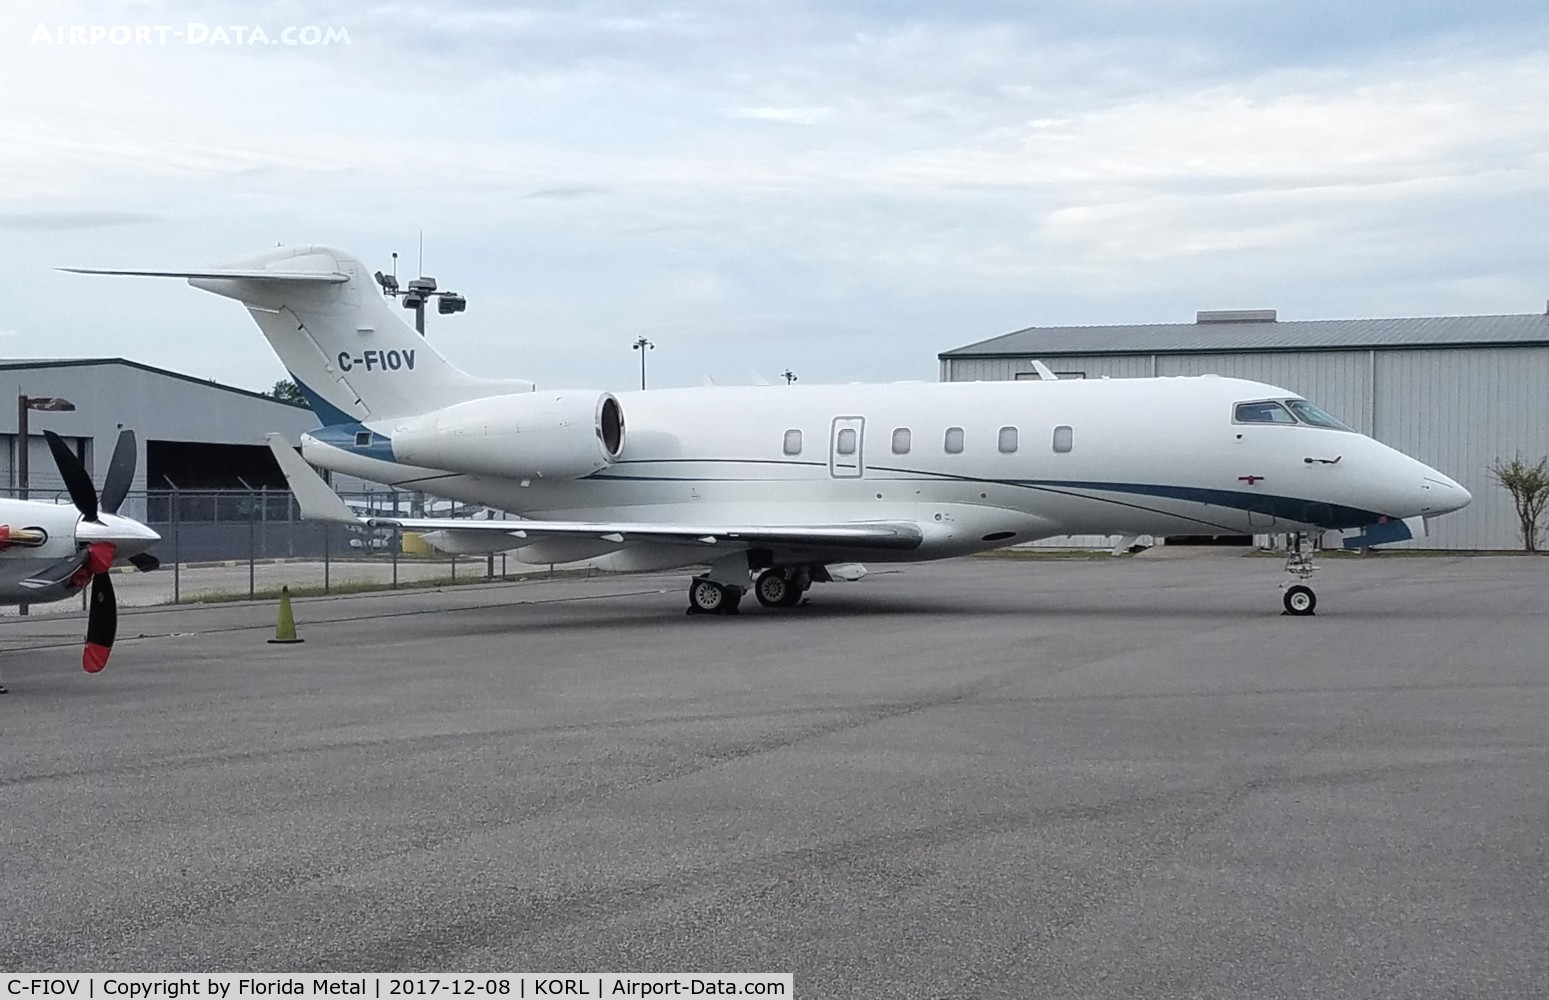 C-FIOV, 2012 Bombardier Challenger 300 (BD-100-1A10) C/N 20369, Challenger 300